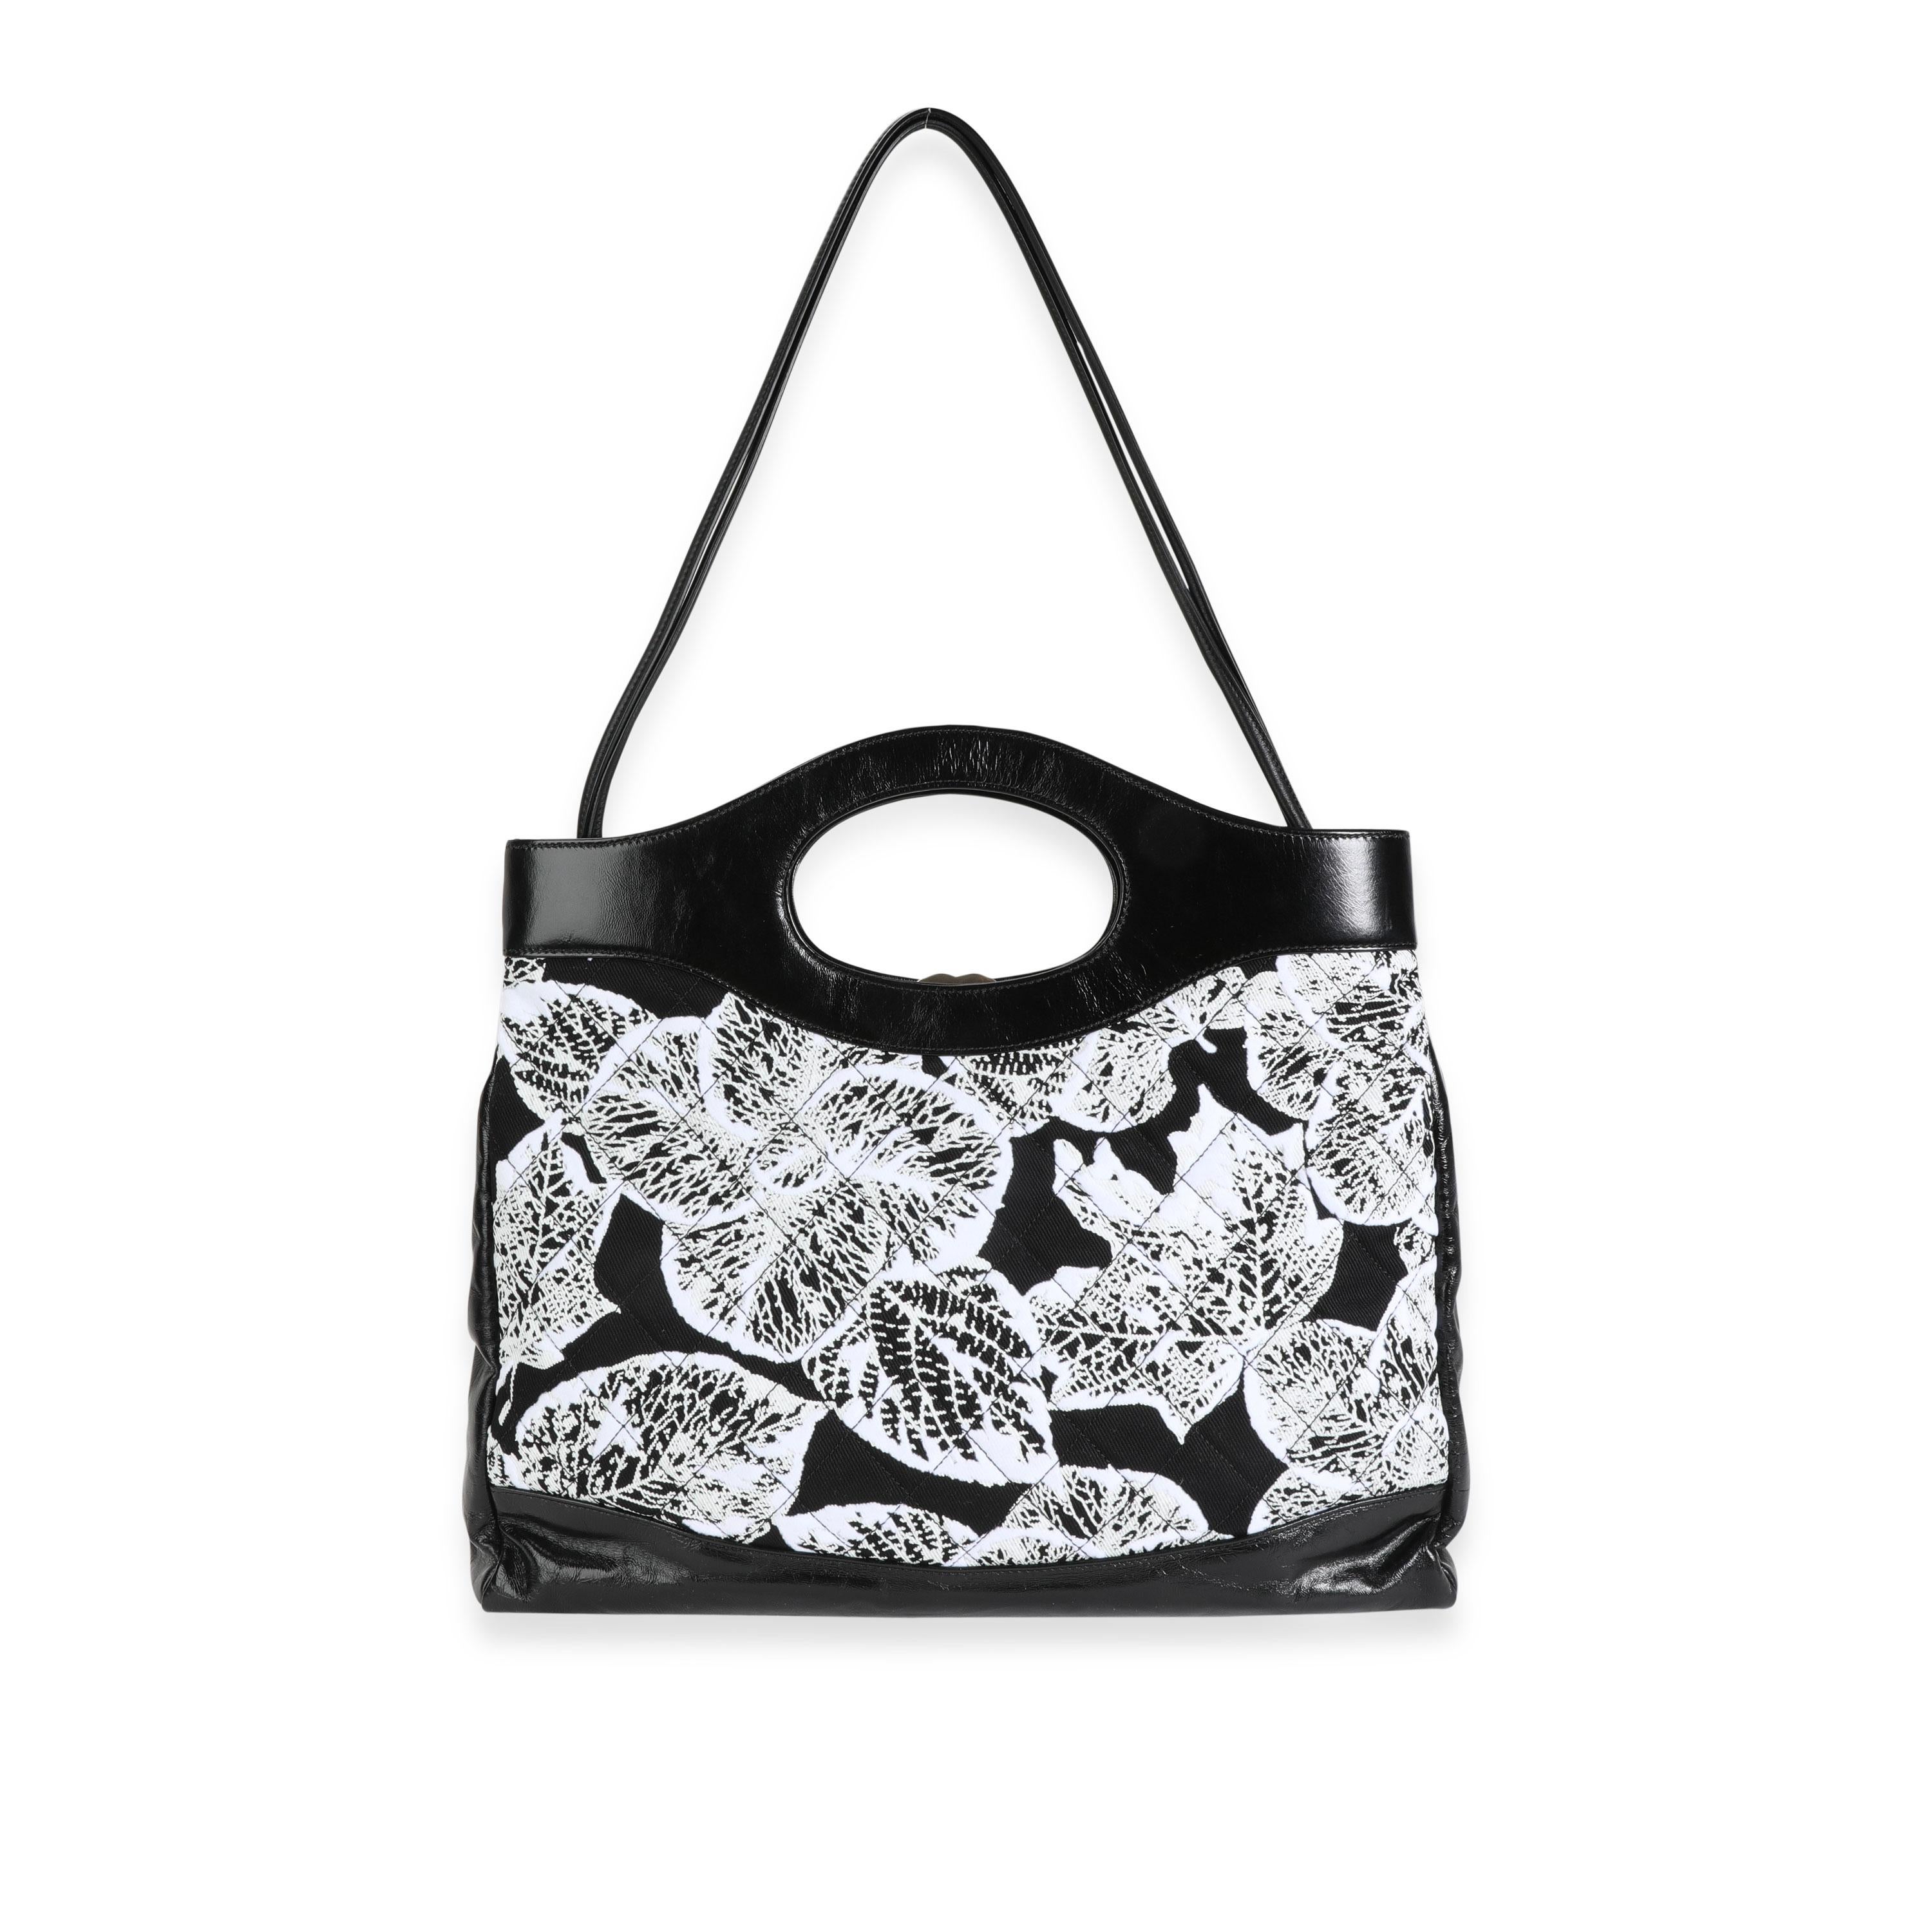 Listing Title: Chanel Black & White Floral Canvas and Calfskin Large 31 Bag
SKU: 118293
Condition: Pre-owned (3000)
Handbag Condition: Mint
Condition Comments: Mint Condition. Plastic on some hardware. No visible signs of wear. Final Sale.
Brand: